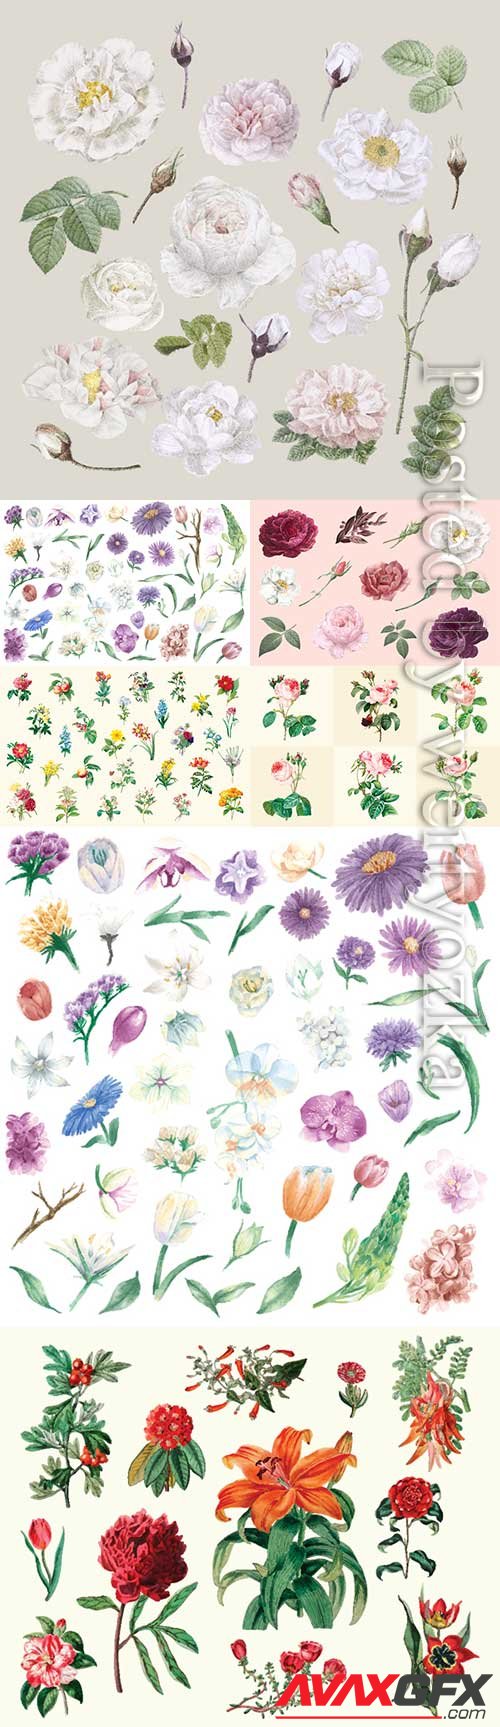 Drawn vector different flowers